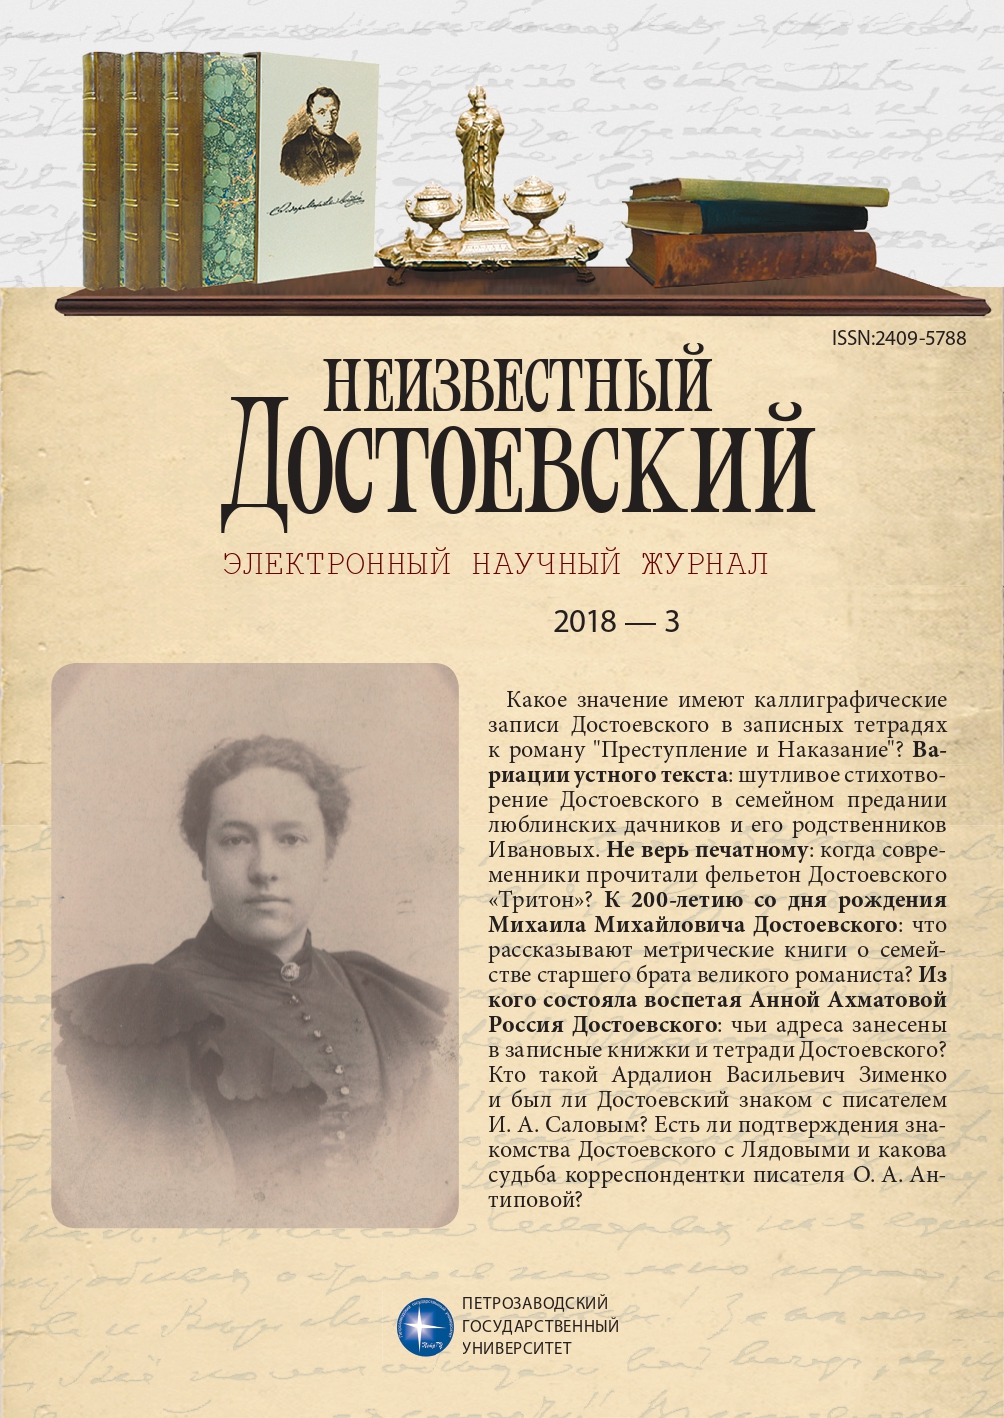 The Note by Yu. A. Ivanov “The Unpublished Verse of F. M. Dostoevsky” Cover Image